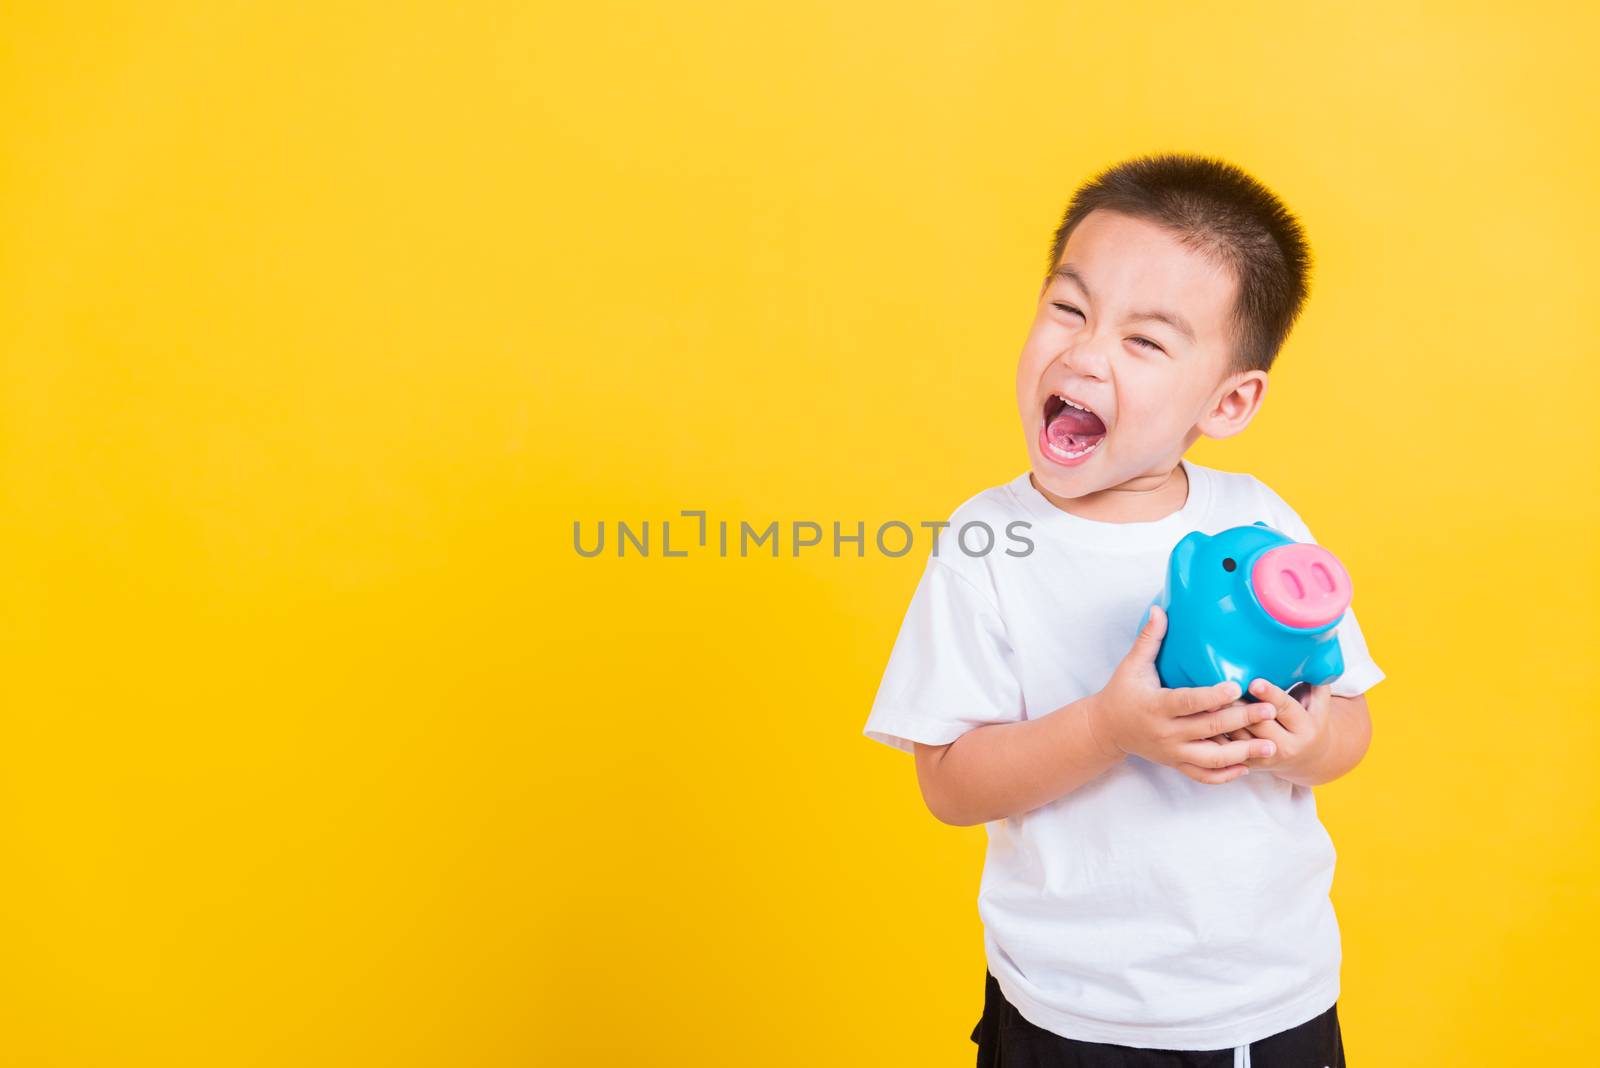 Asian Thai happy portrait cute little cheerful child boy smile holding piggy bank and looking camera, studio shot isolated on yellow background with copy space